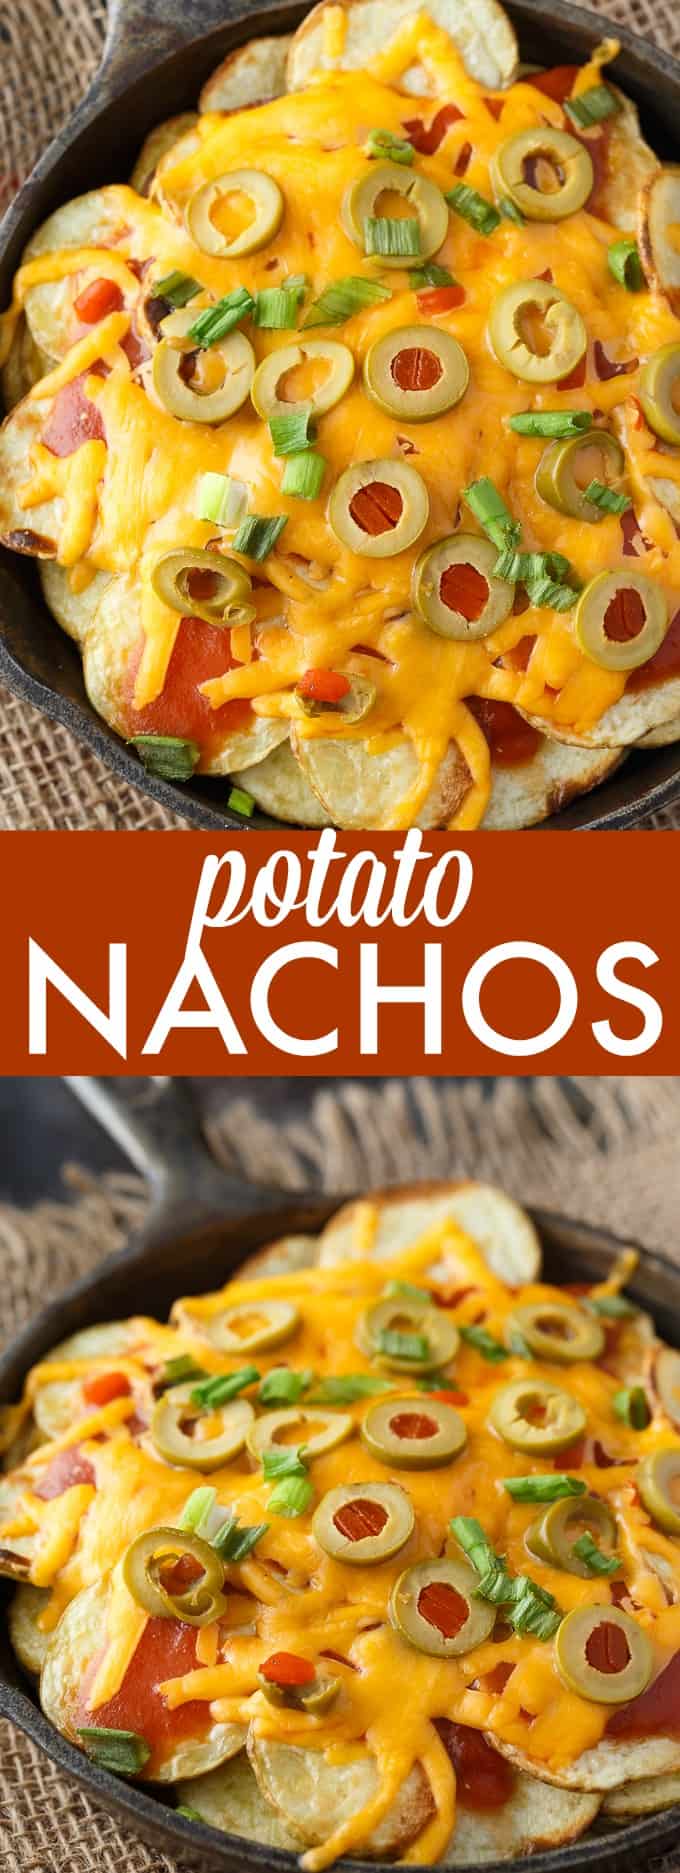 Potato Nachos - Crispy, flavorful potatoes loaded with taco sauce, green olives, green onions and lots of melty cheddar cheese. The perfect appetizer!